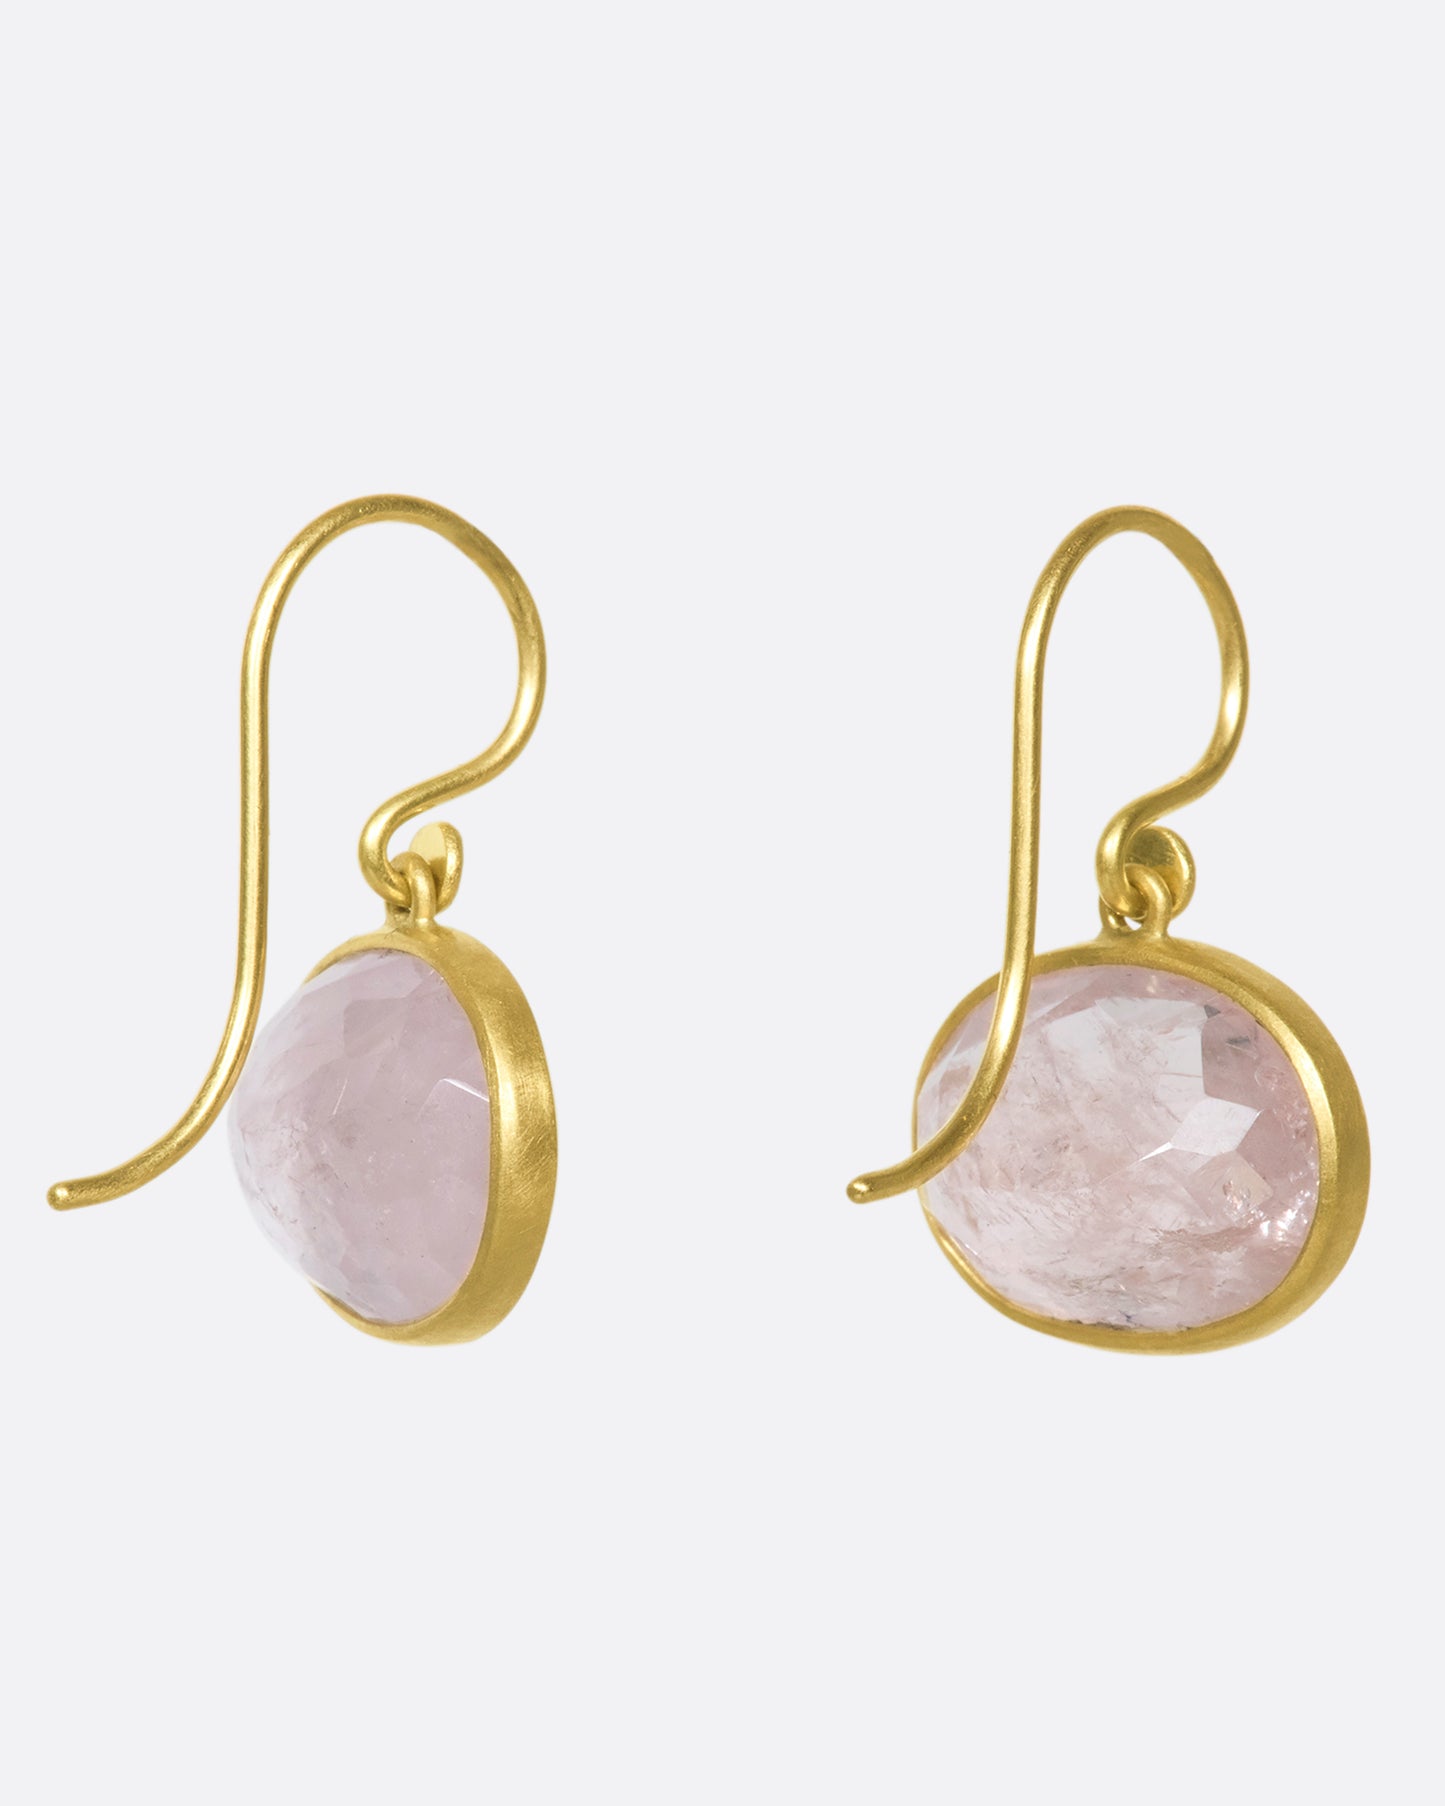 A back view of a pair of oval morganite drop earrings with yellow gold bezels and hooks.